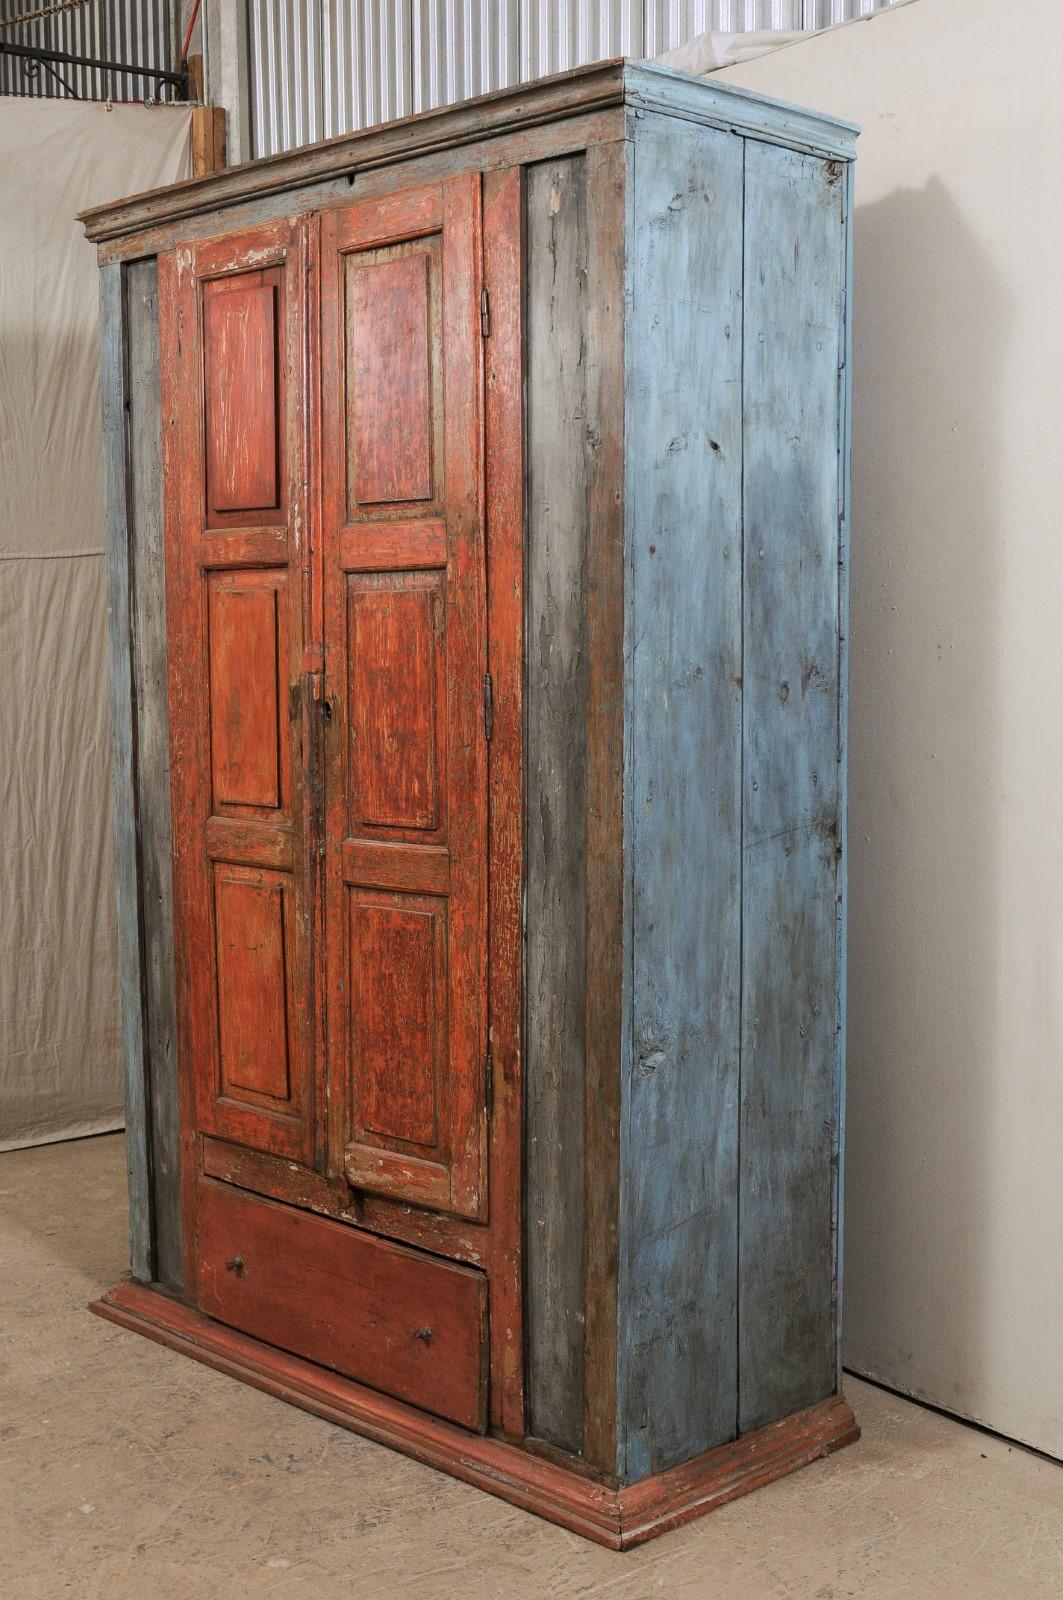 8ft tall cabinet